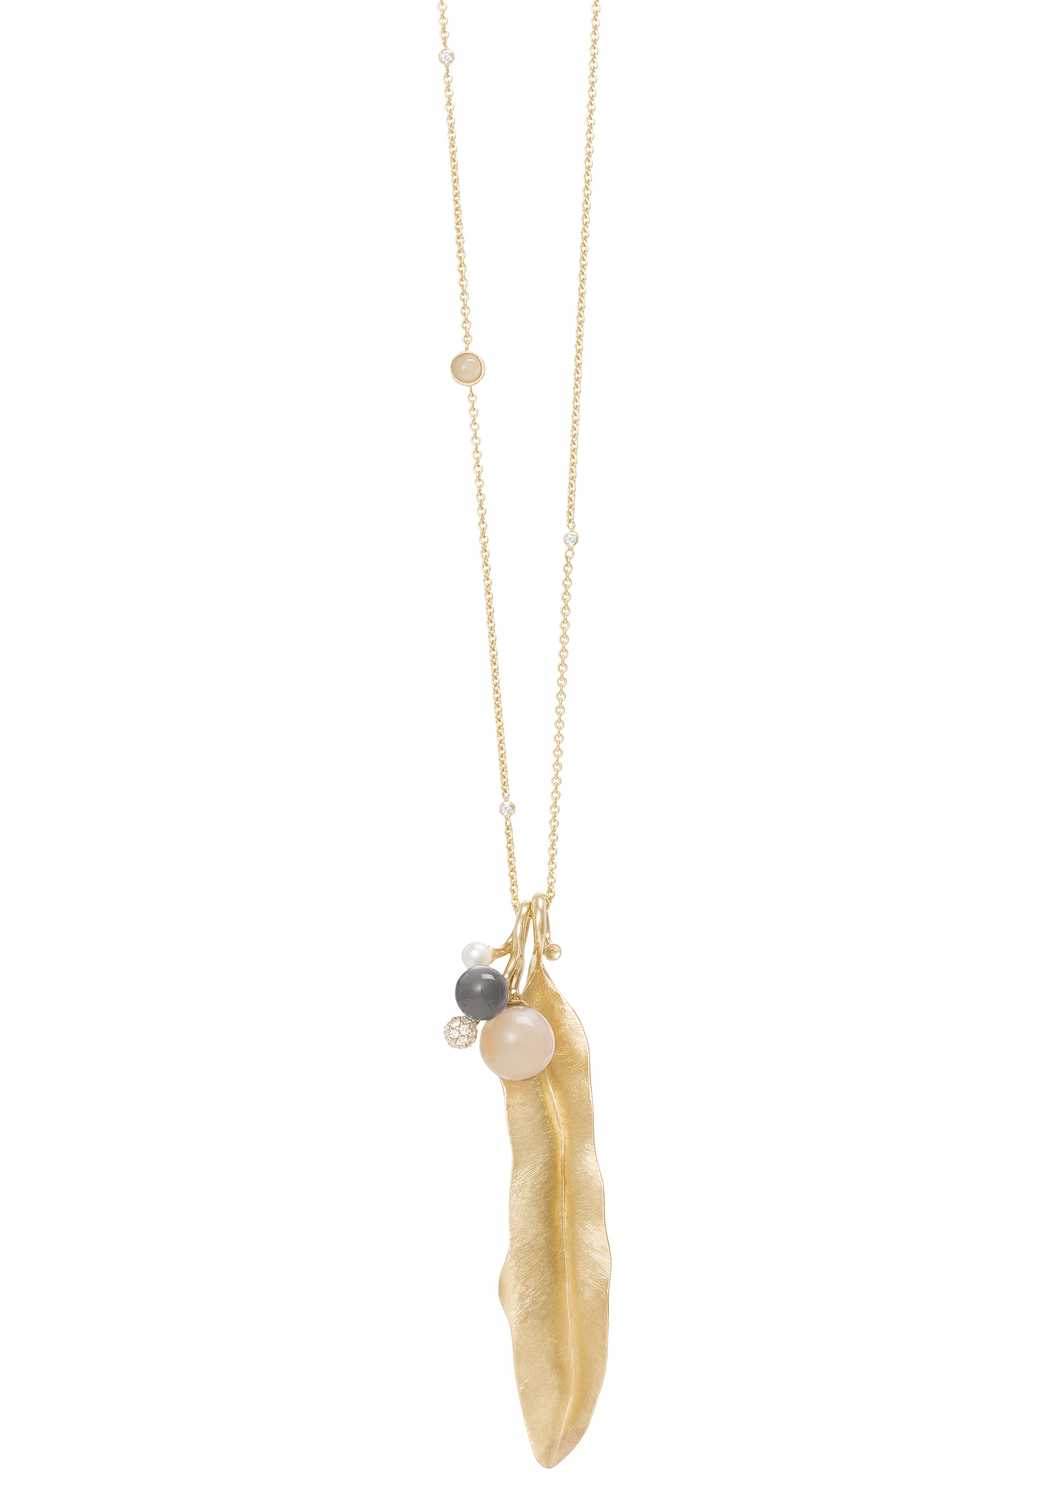 OLE LYNGGAARD Lotus Moonstone Collier (Chain and charms sold separately) | OsterJewelers.com